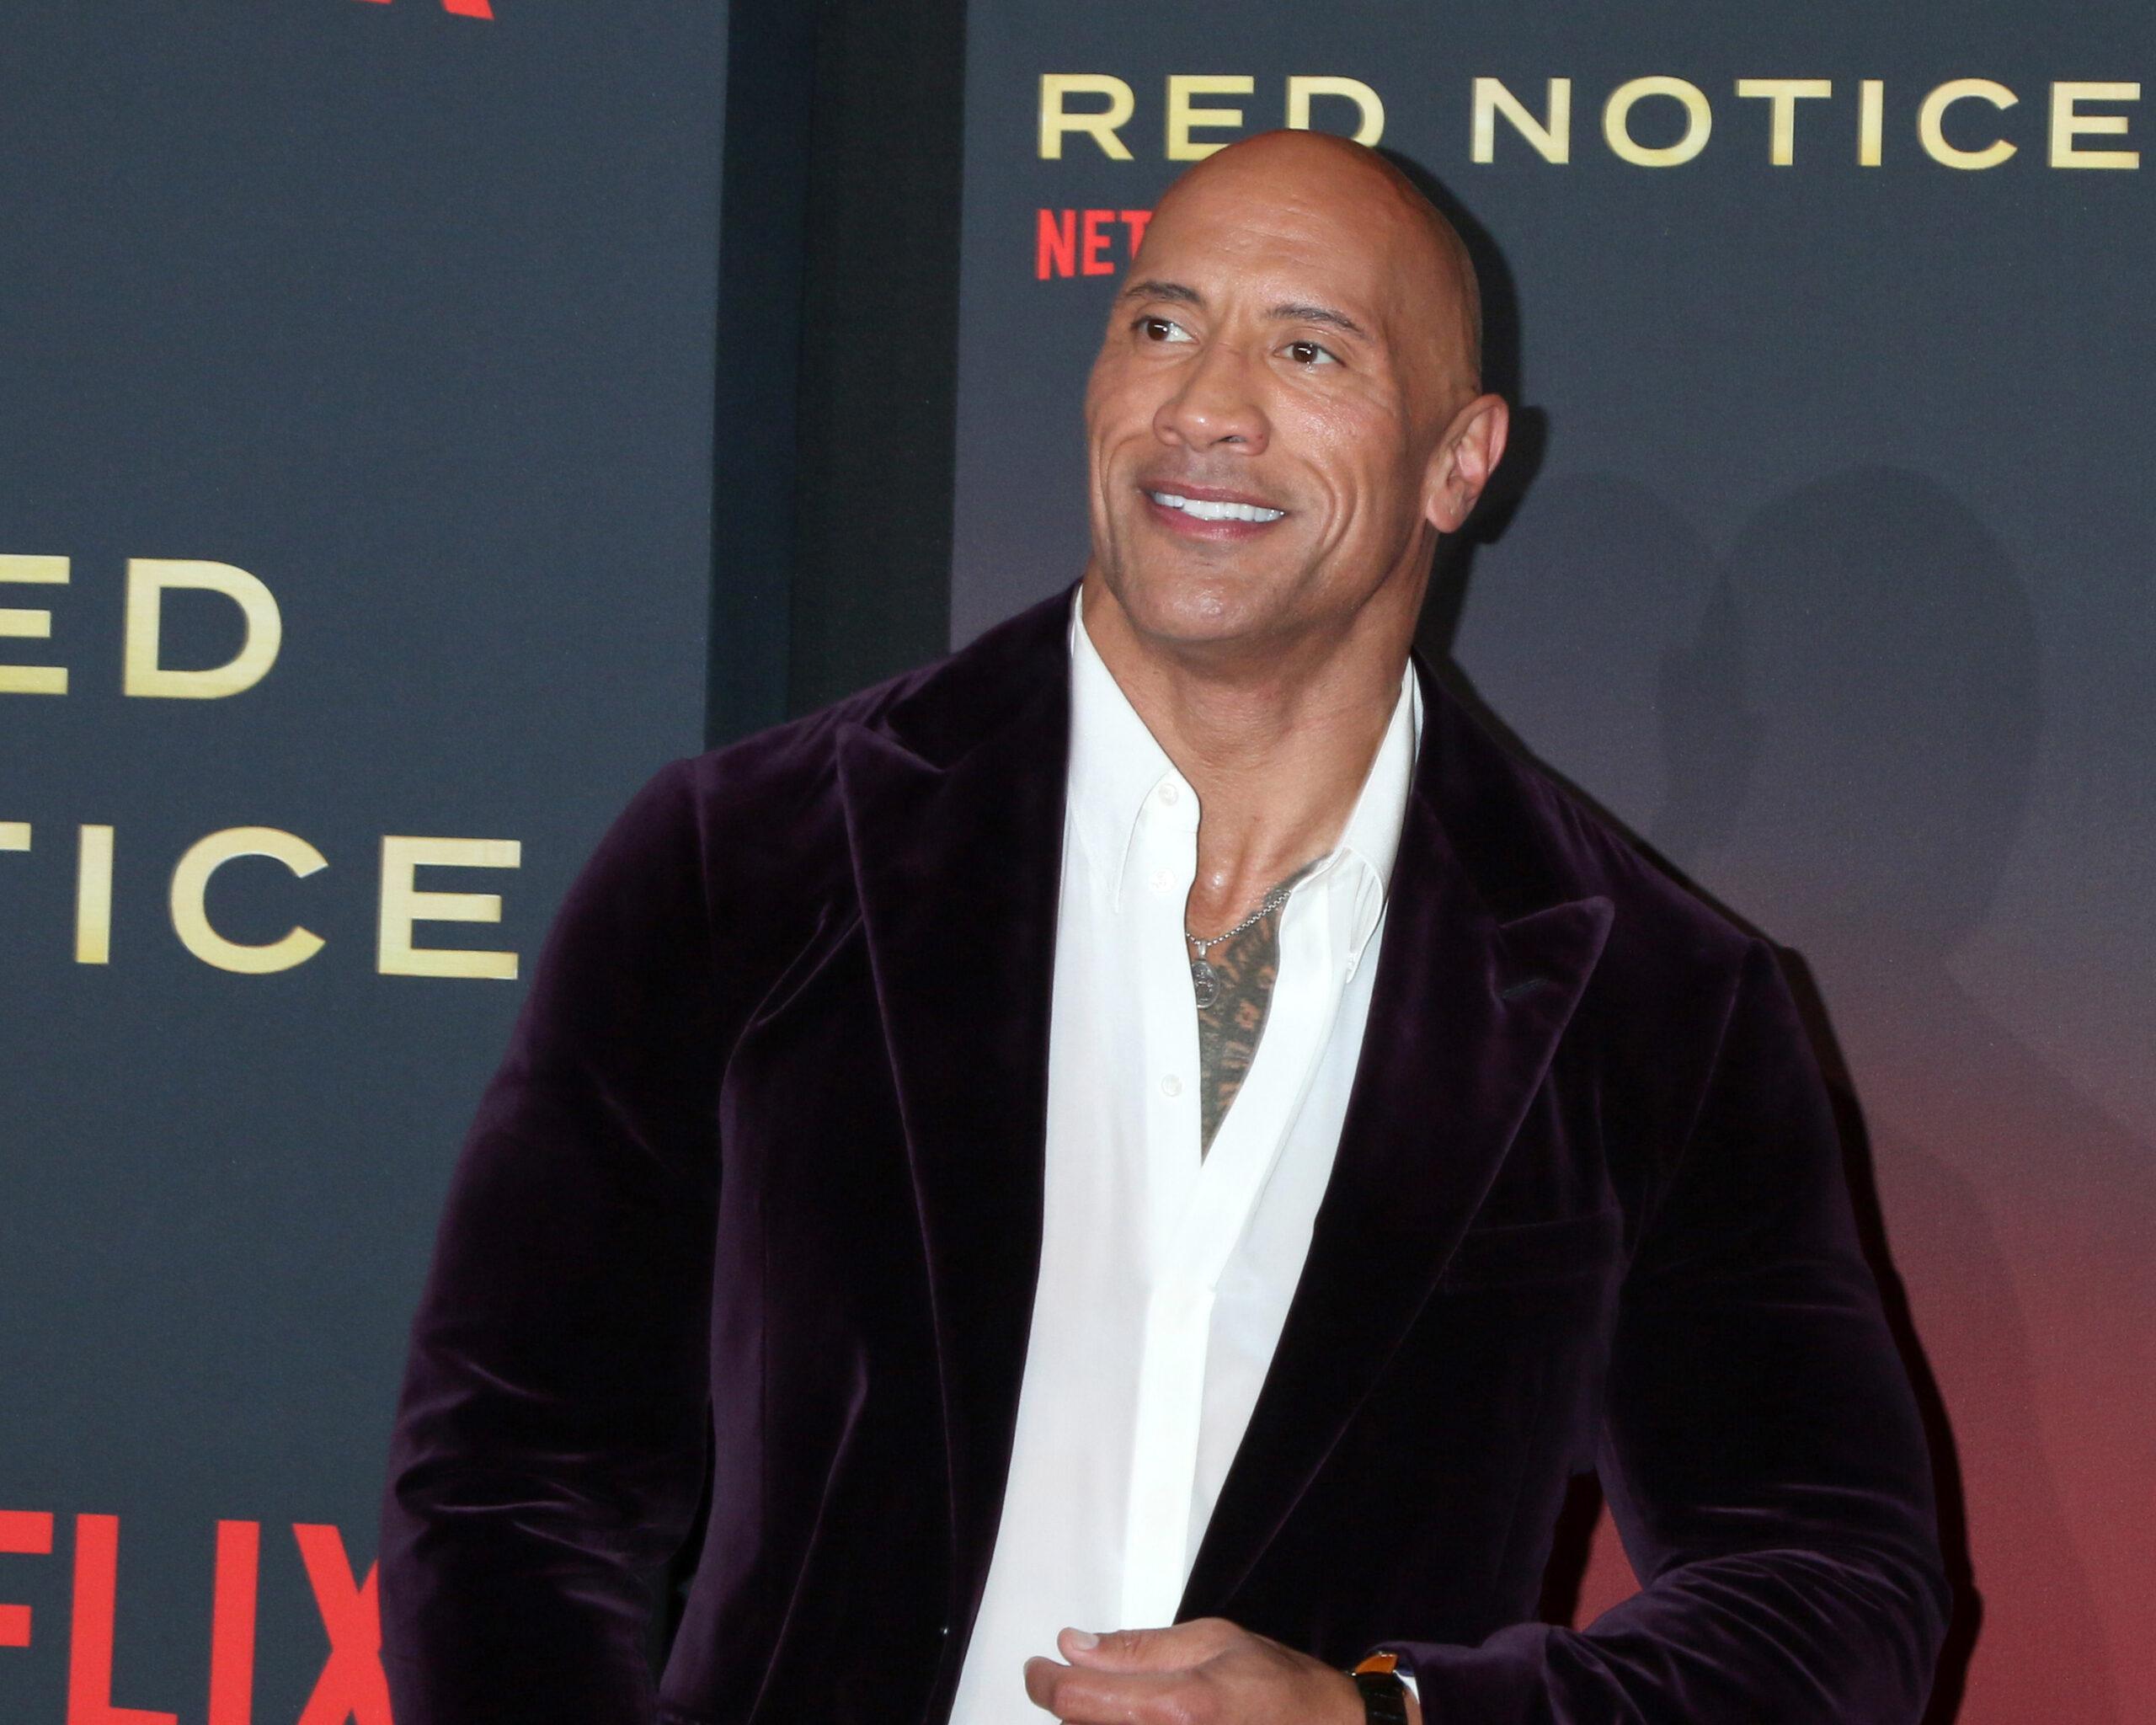 Dwayne Johnson at Red Notice World Premiere - Los Angeles